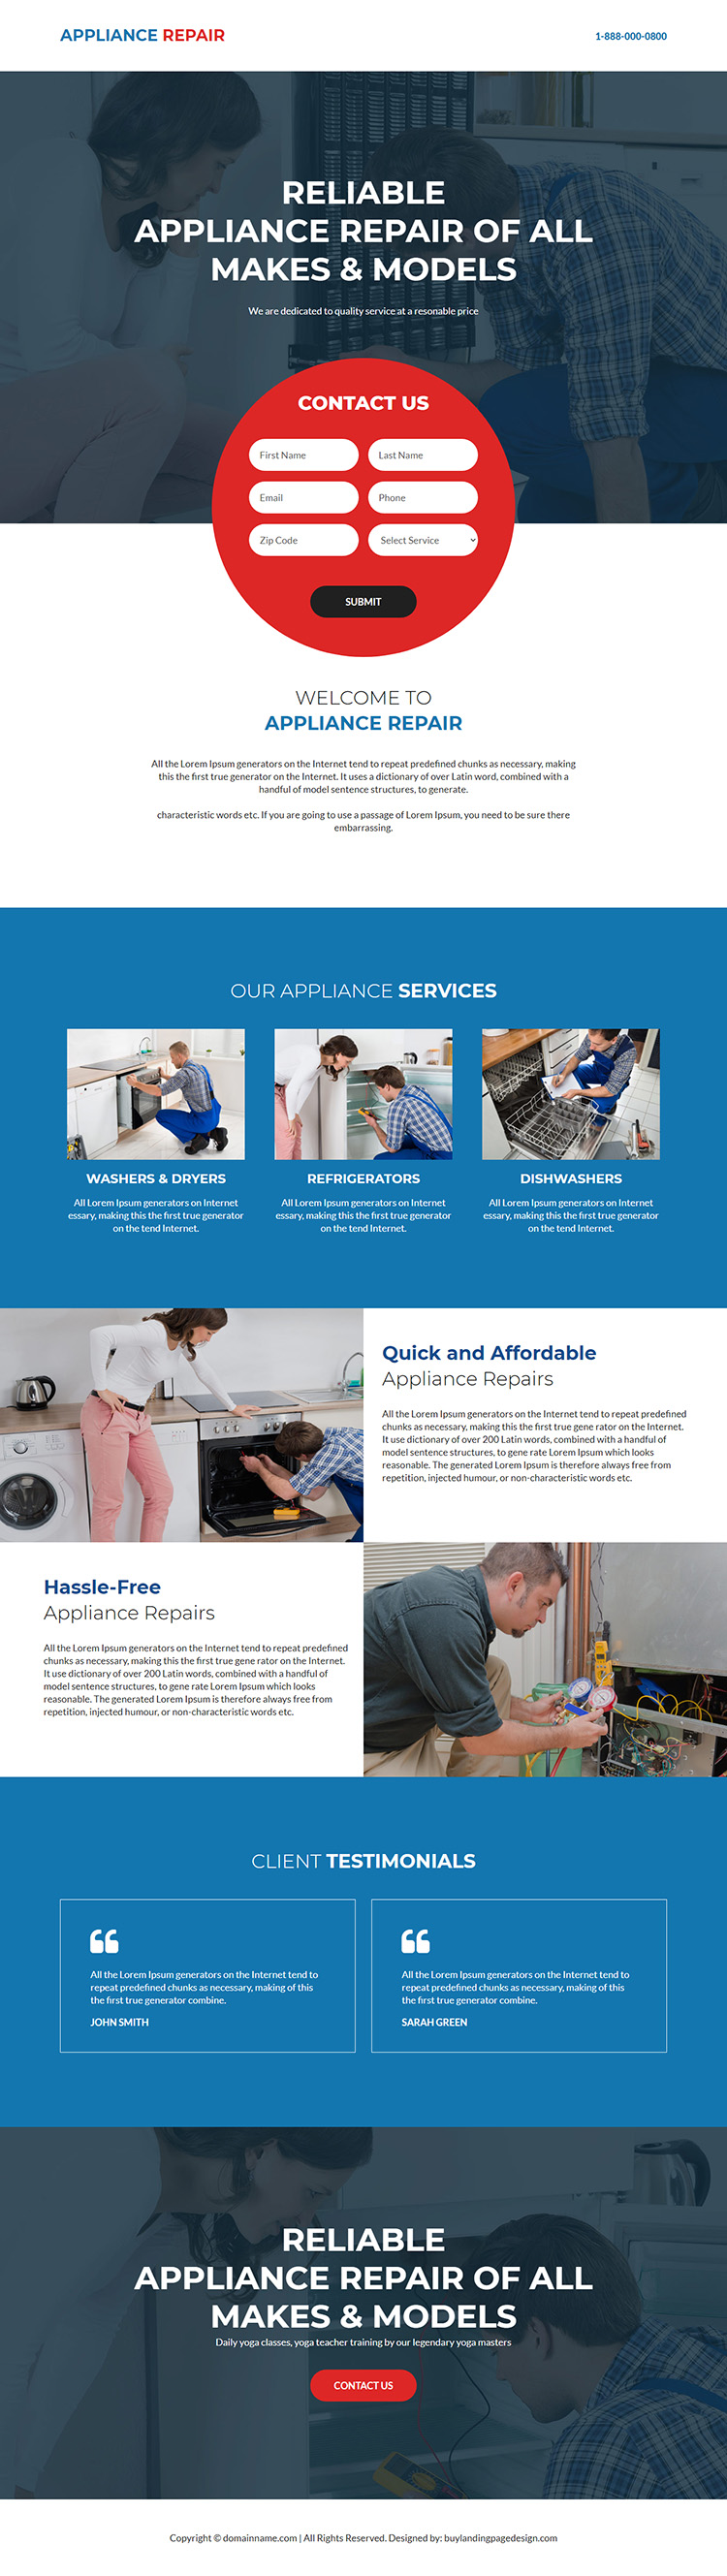 quick and affordable appliance repair service responsive landing page